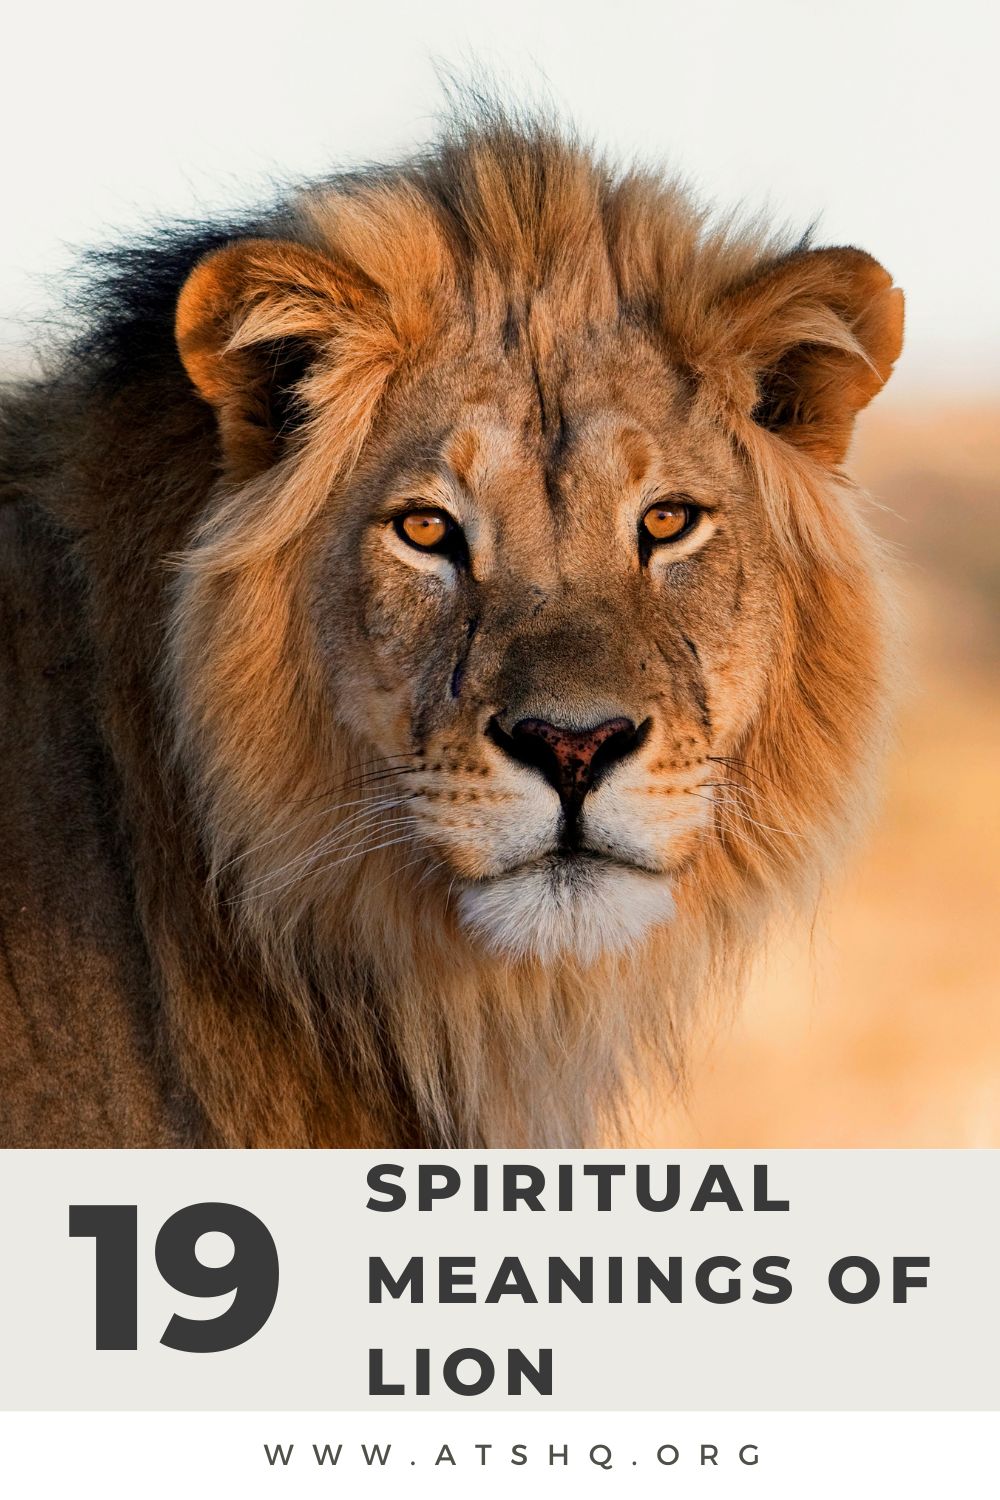 Lion Symbolism: 19 Spiritual Meanings Of Lion